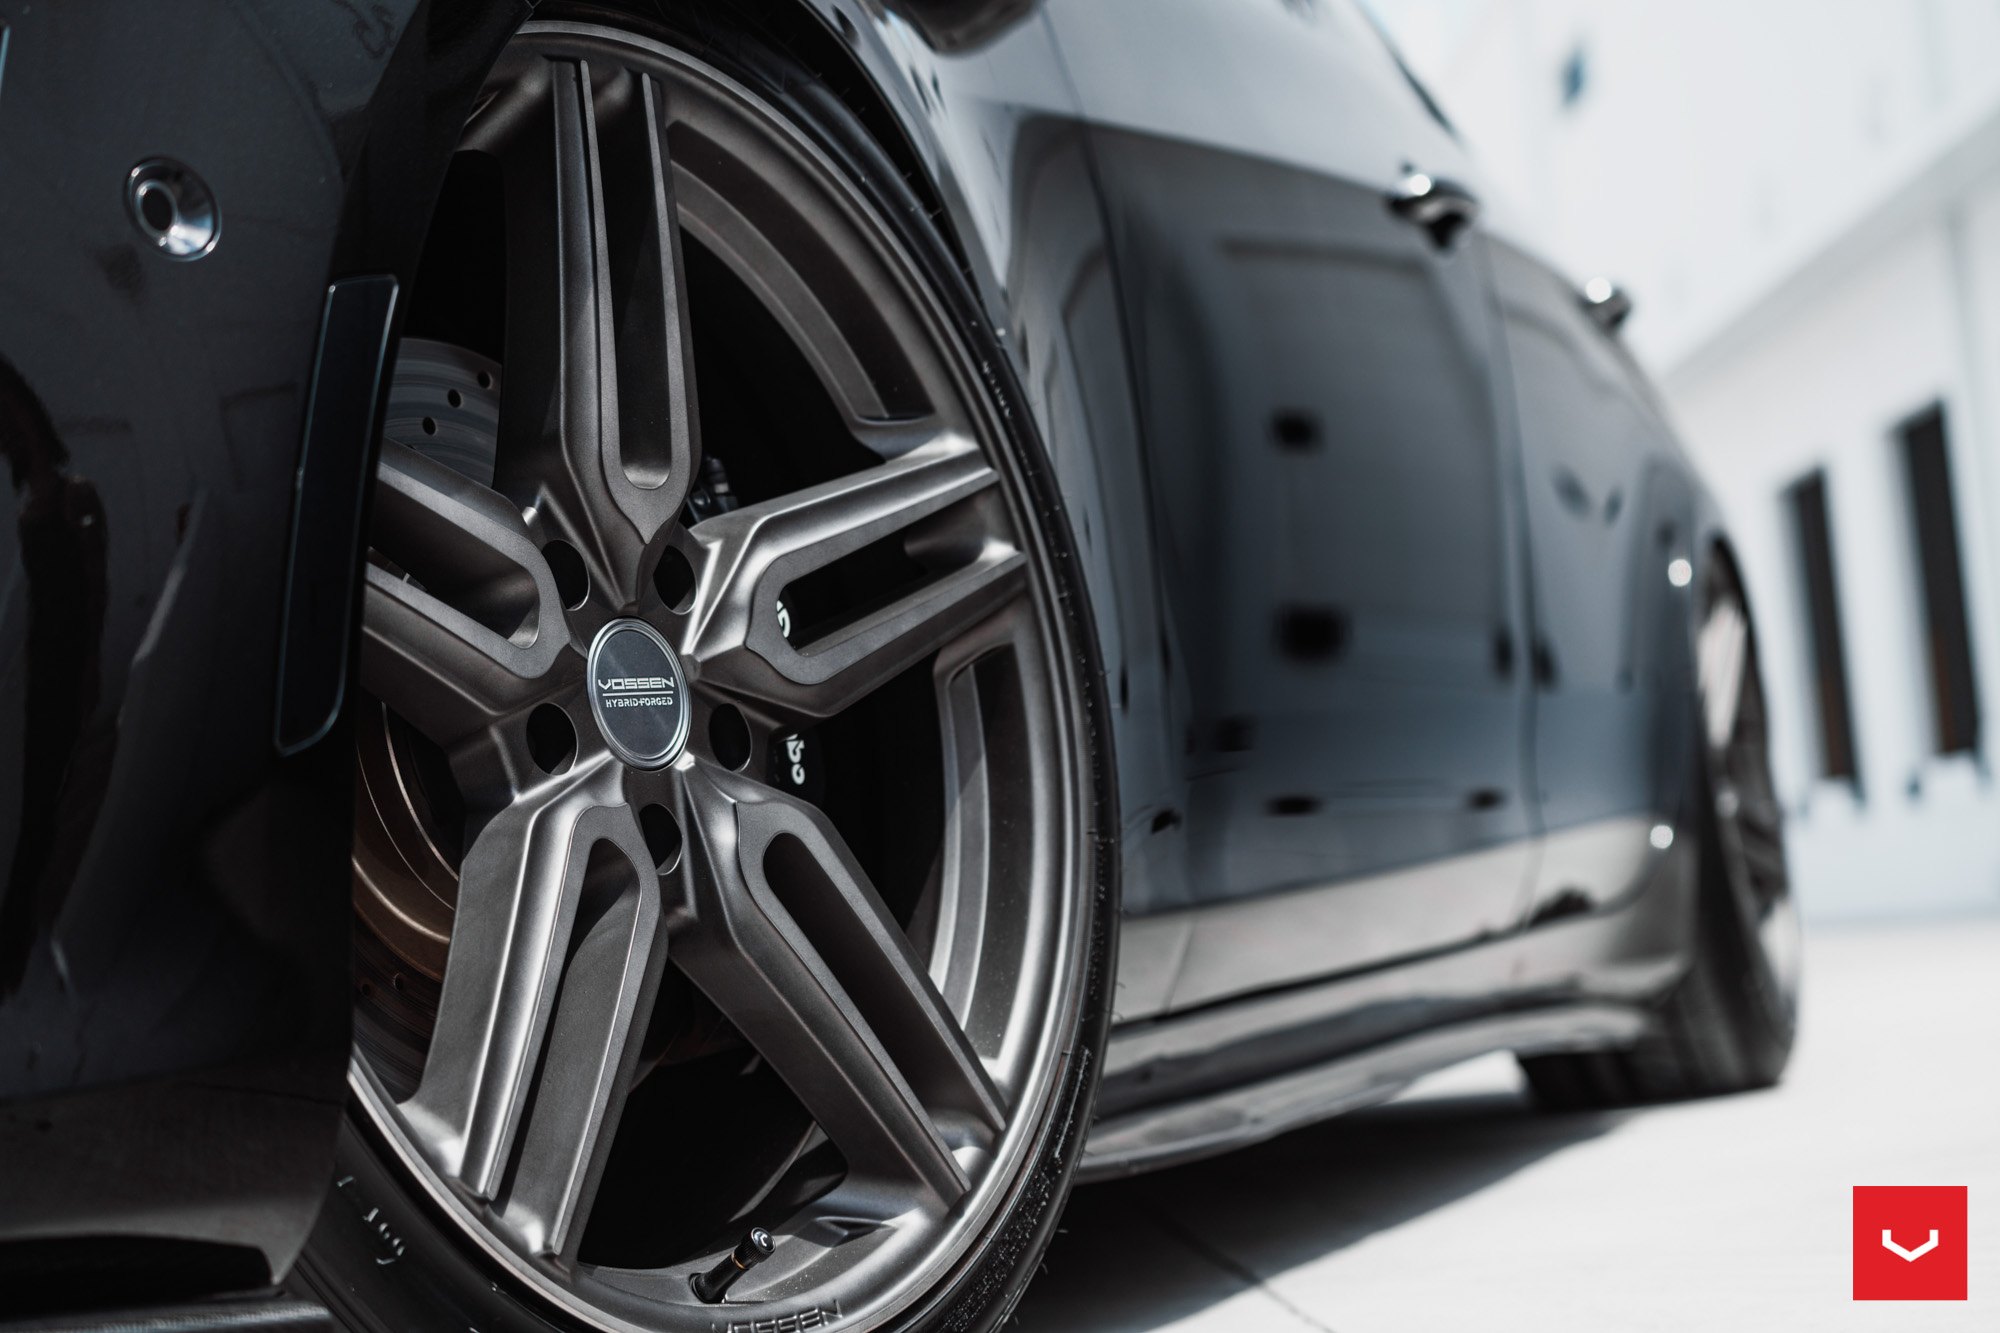 Vossen Hybrid Forged Rims on Black Cadillac CTS - Photo by Vossen